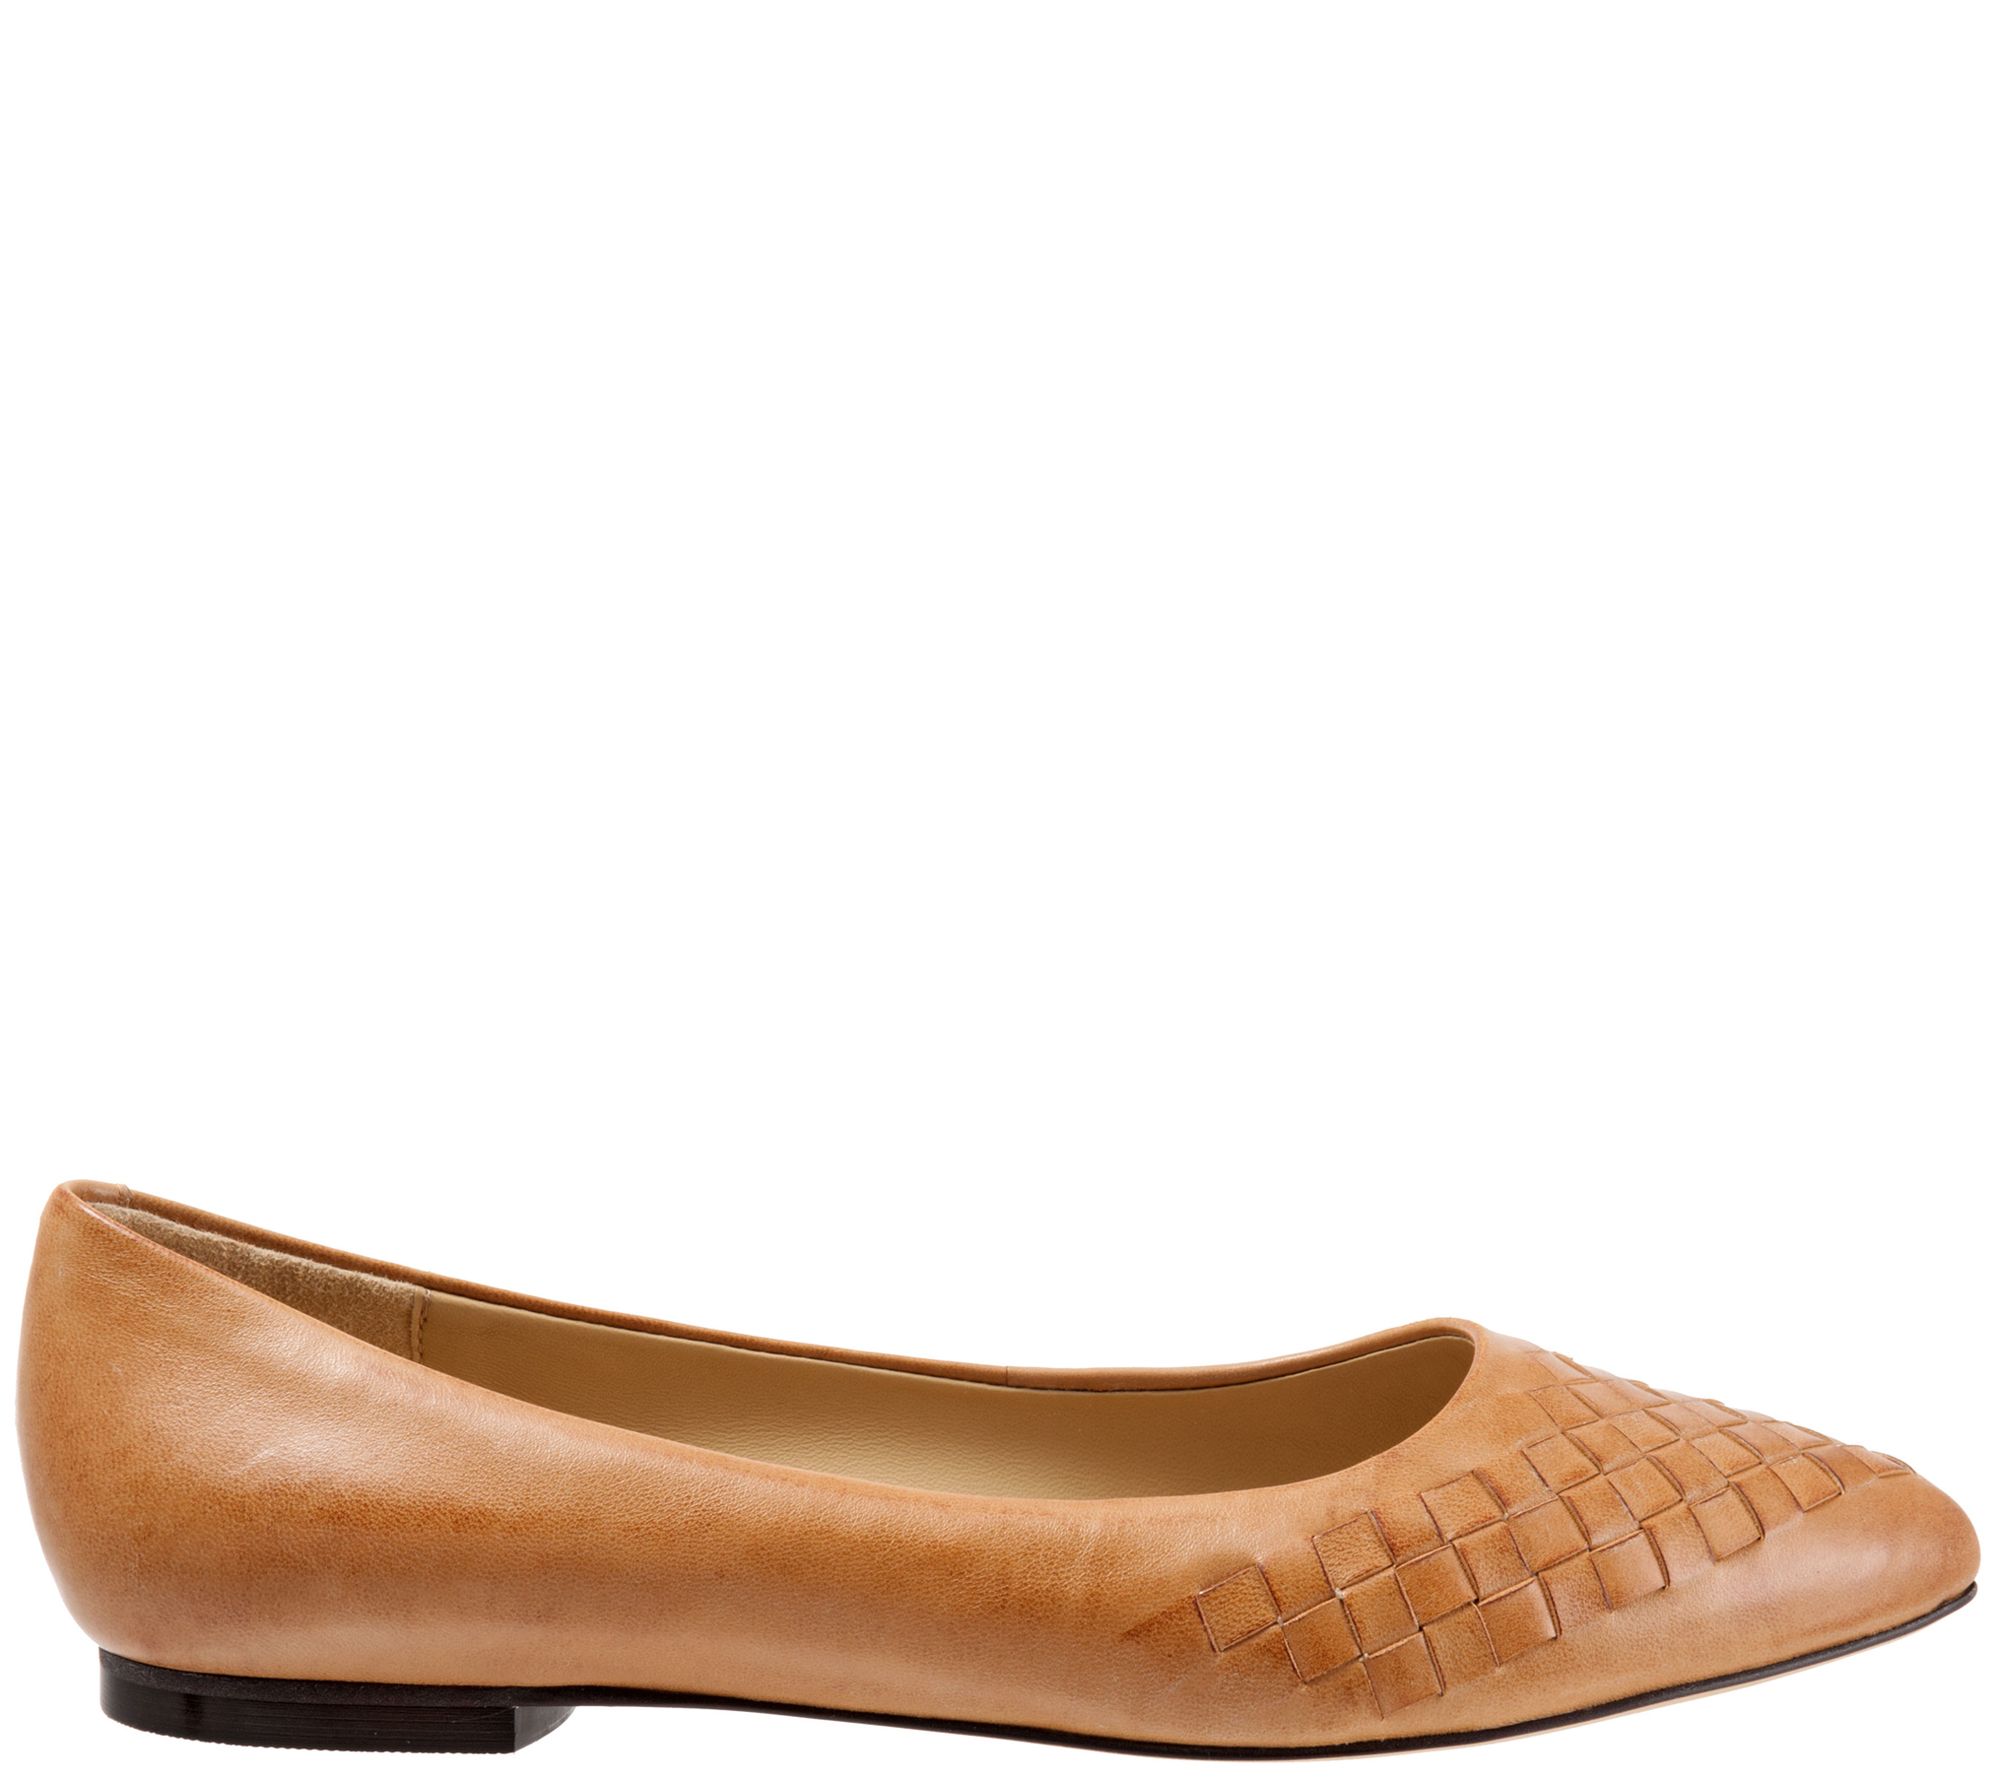 Trotters Pointed Toe Leather Flats - Estee Woven - QVC.com